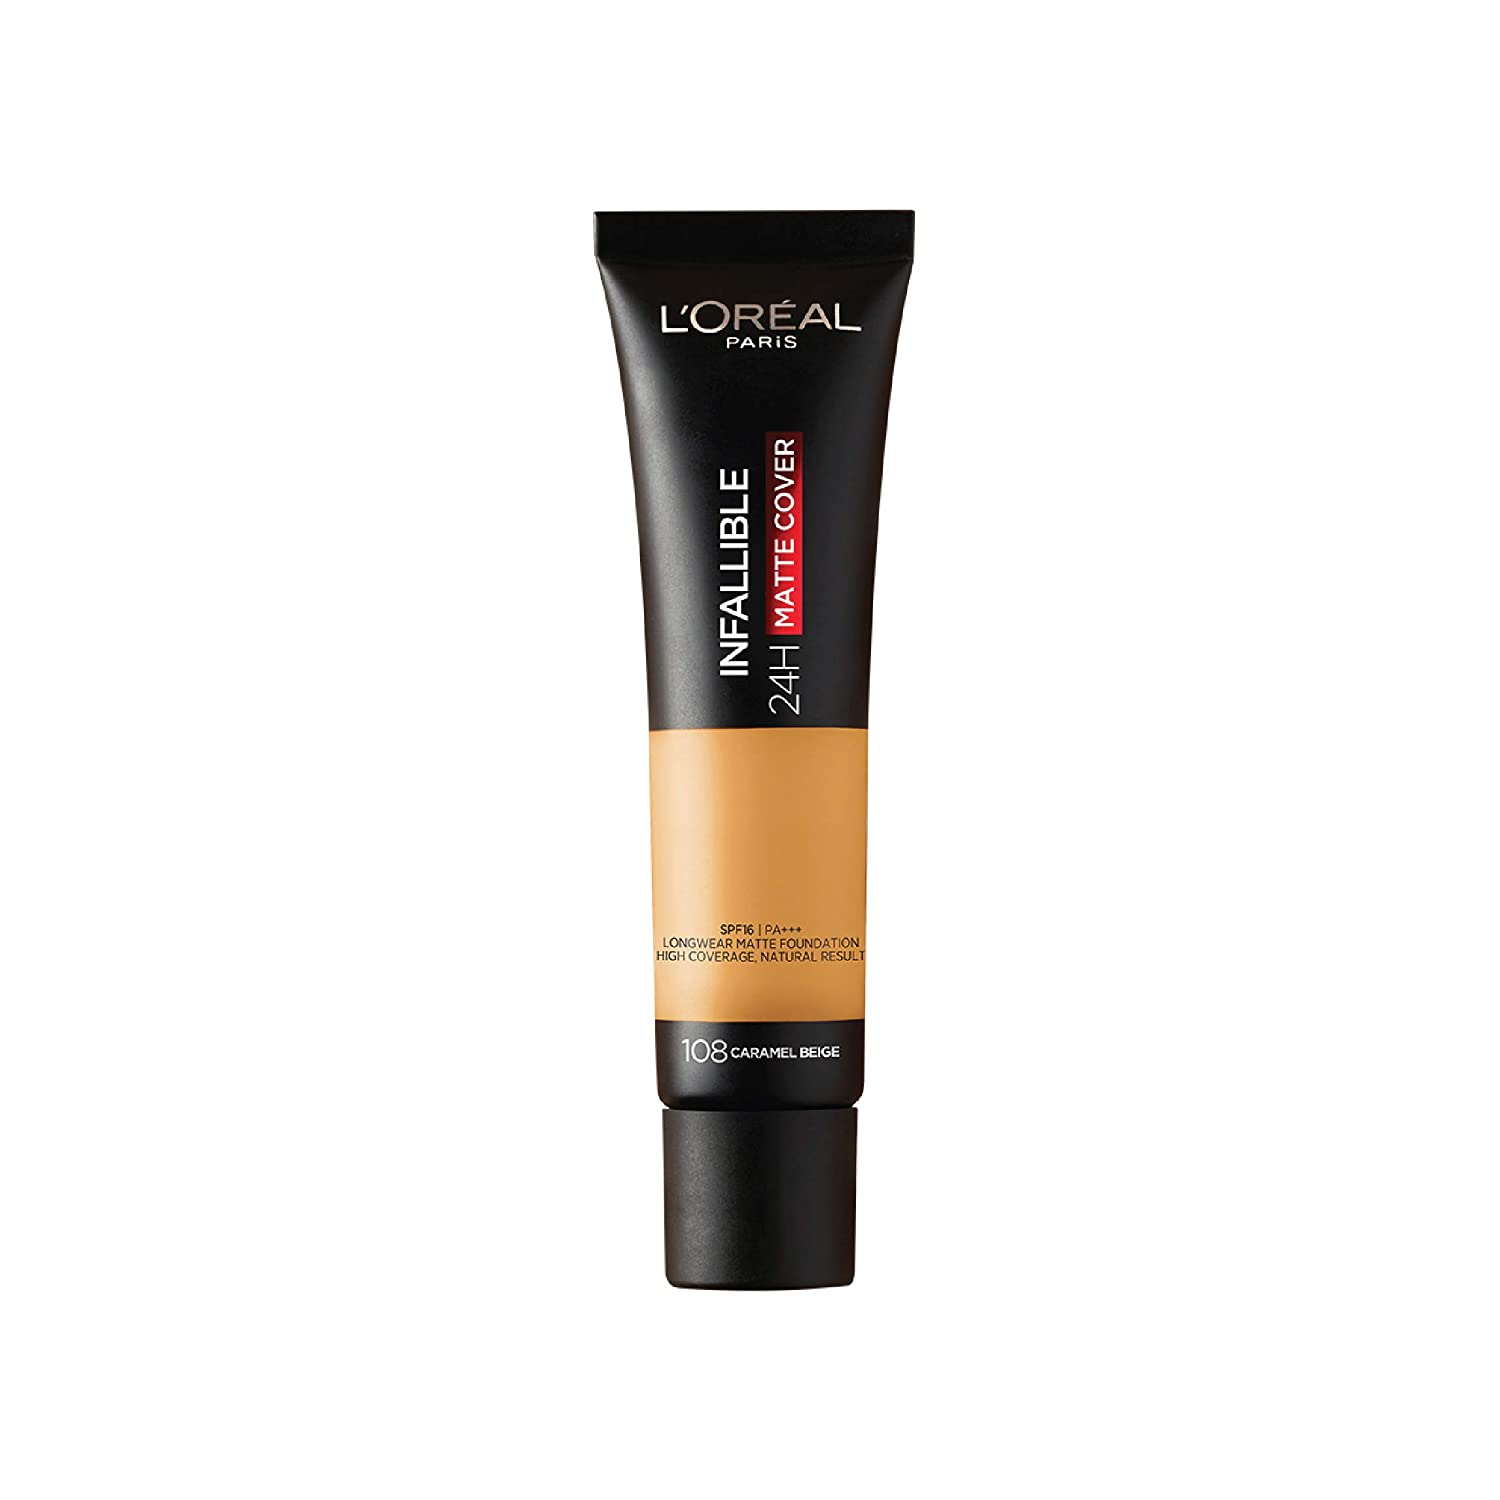 L'Oreal Paris, Infallible 24H Matte Cover Foundation (Source: www.amazon.in)